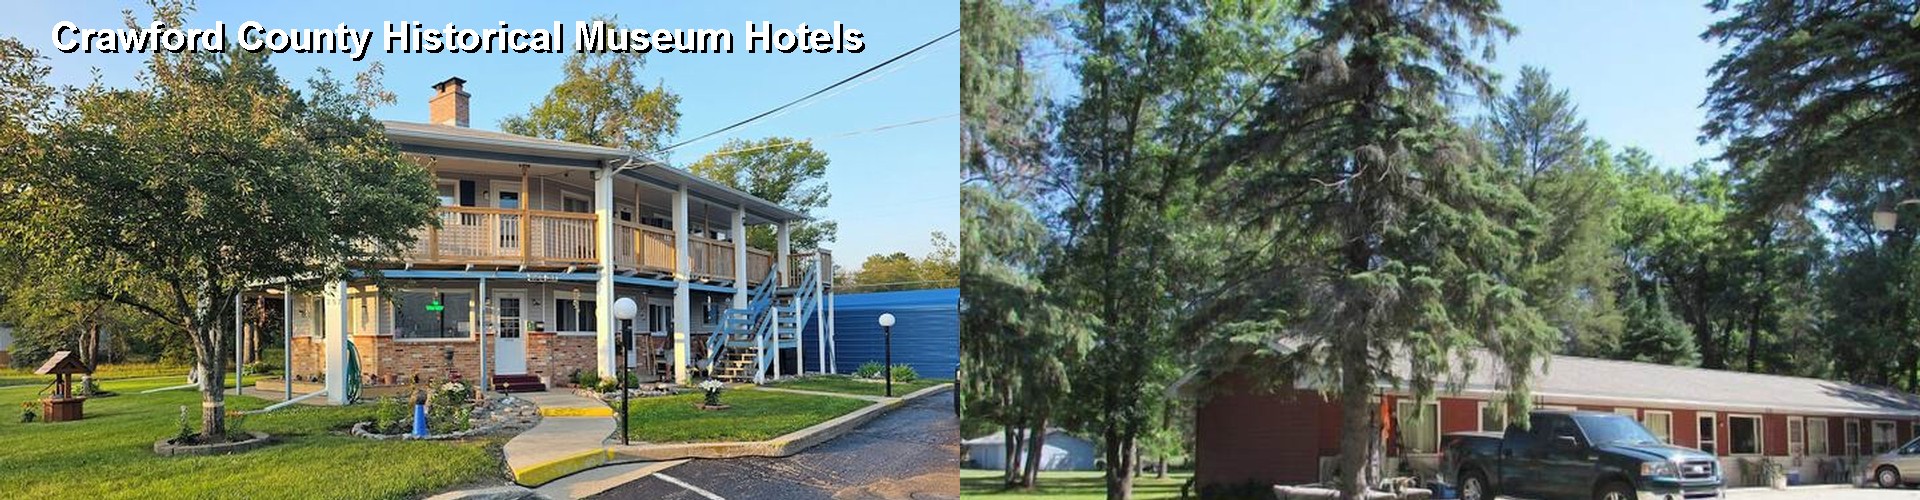 4 Best Hotels near Crawford County Historical Museum